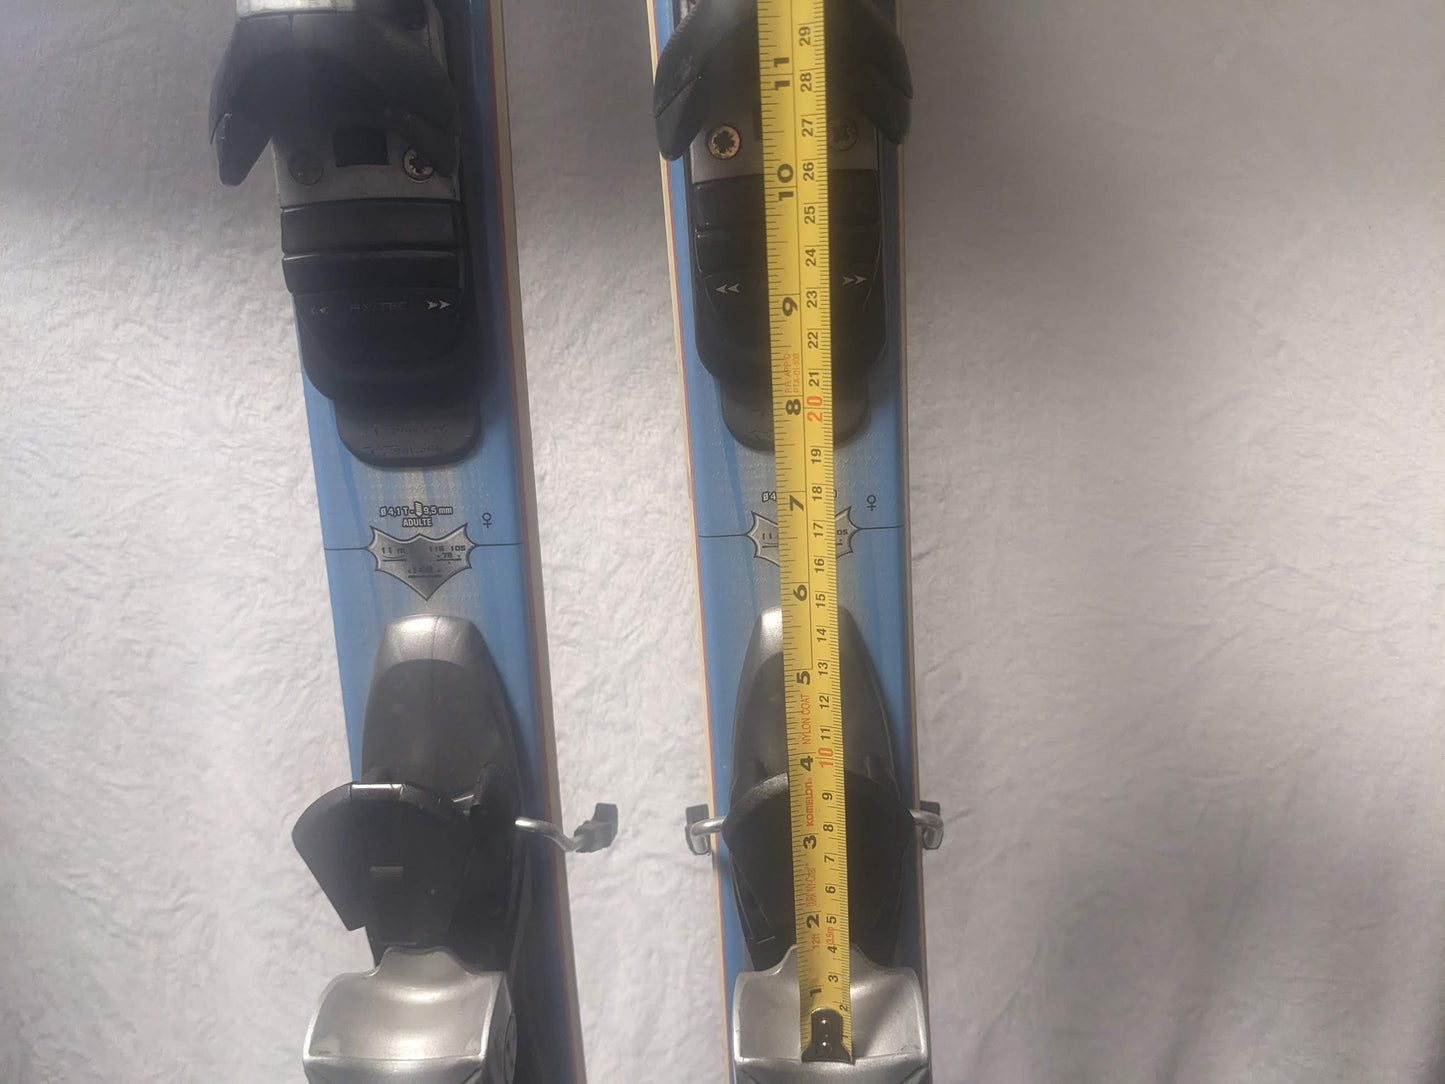 Rossignol B2 48 Skis w/Rossignol Bindings Size 148cm Color Blue Condition Used